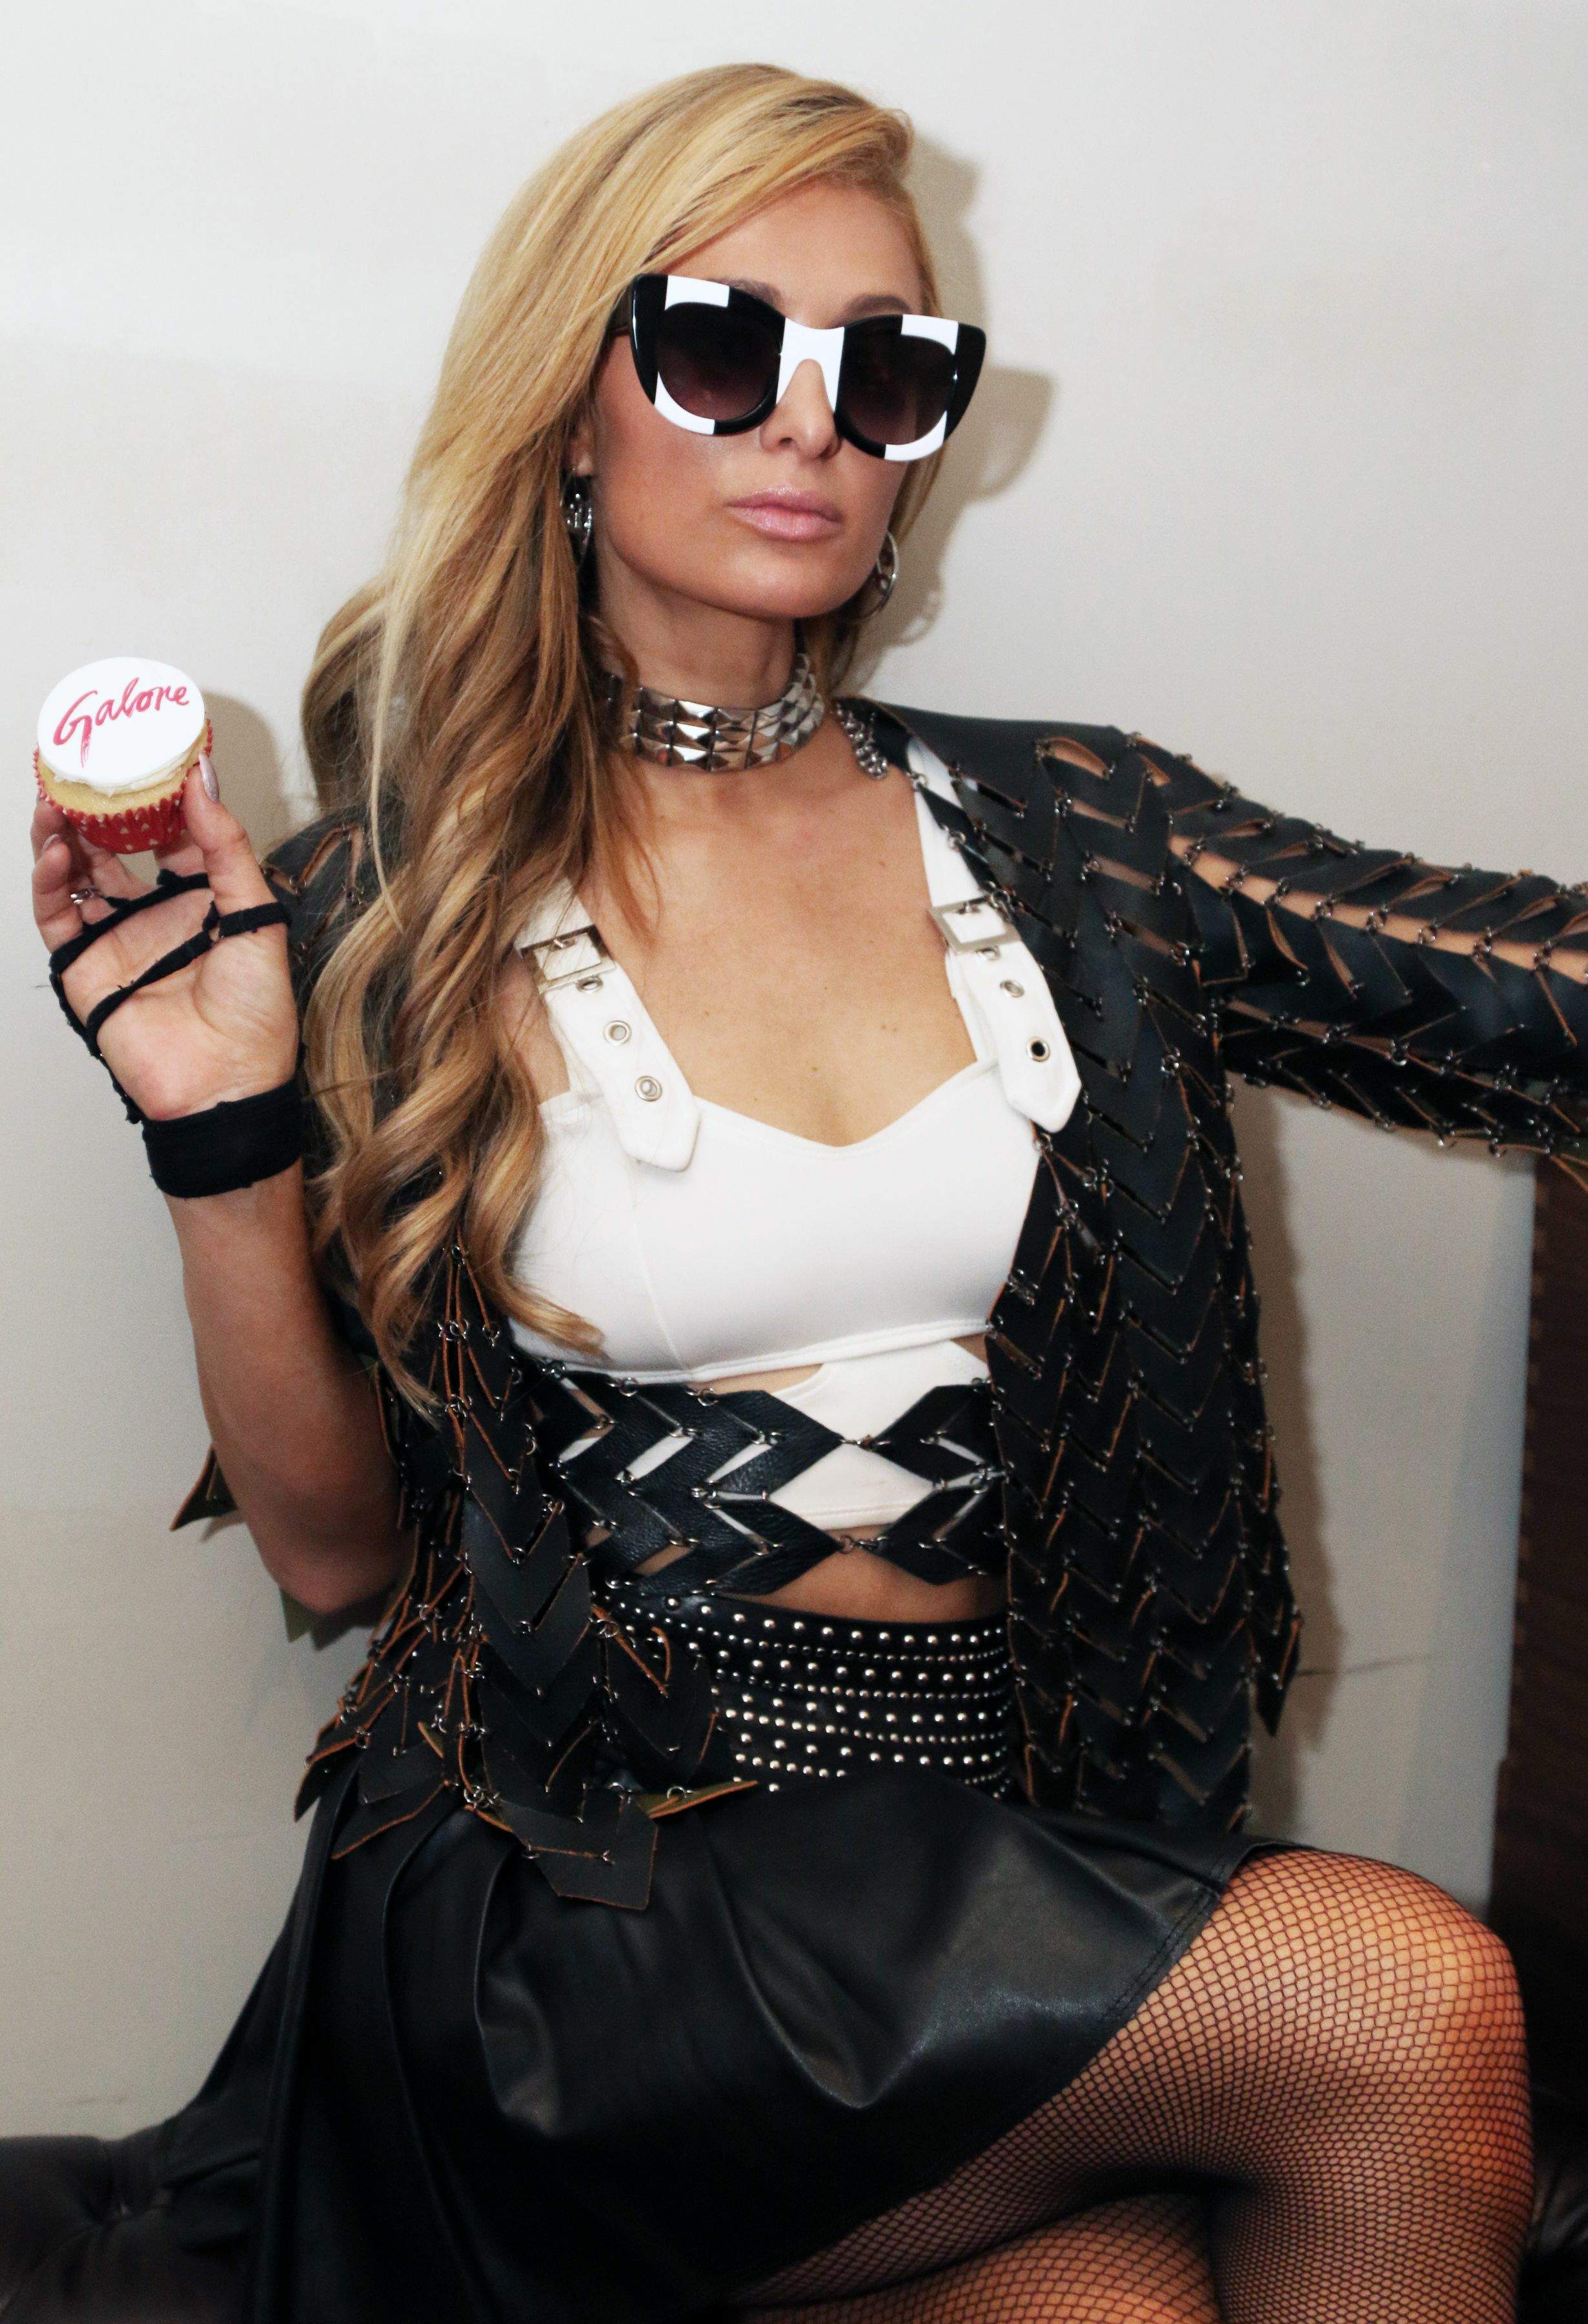 Paris Hilton attends Galore and Juicy Couture Ball